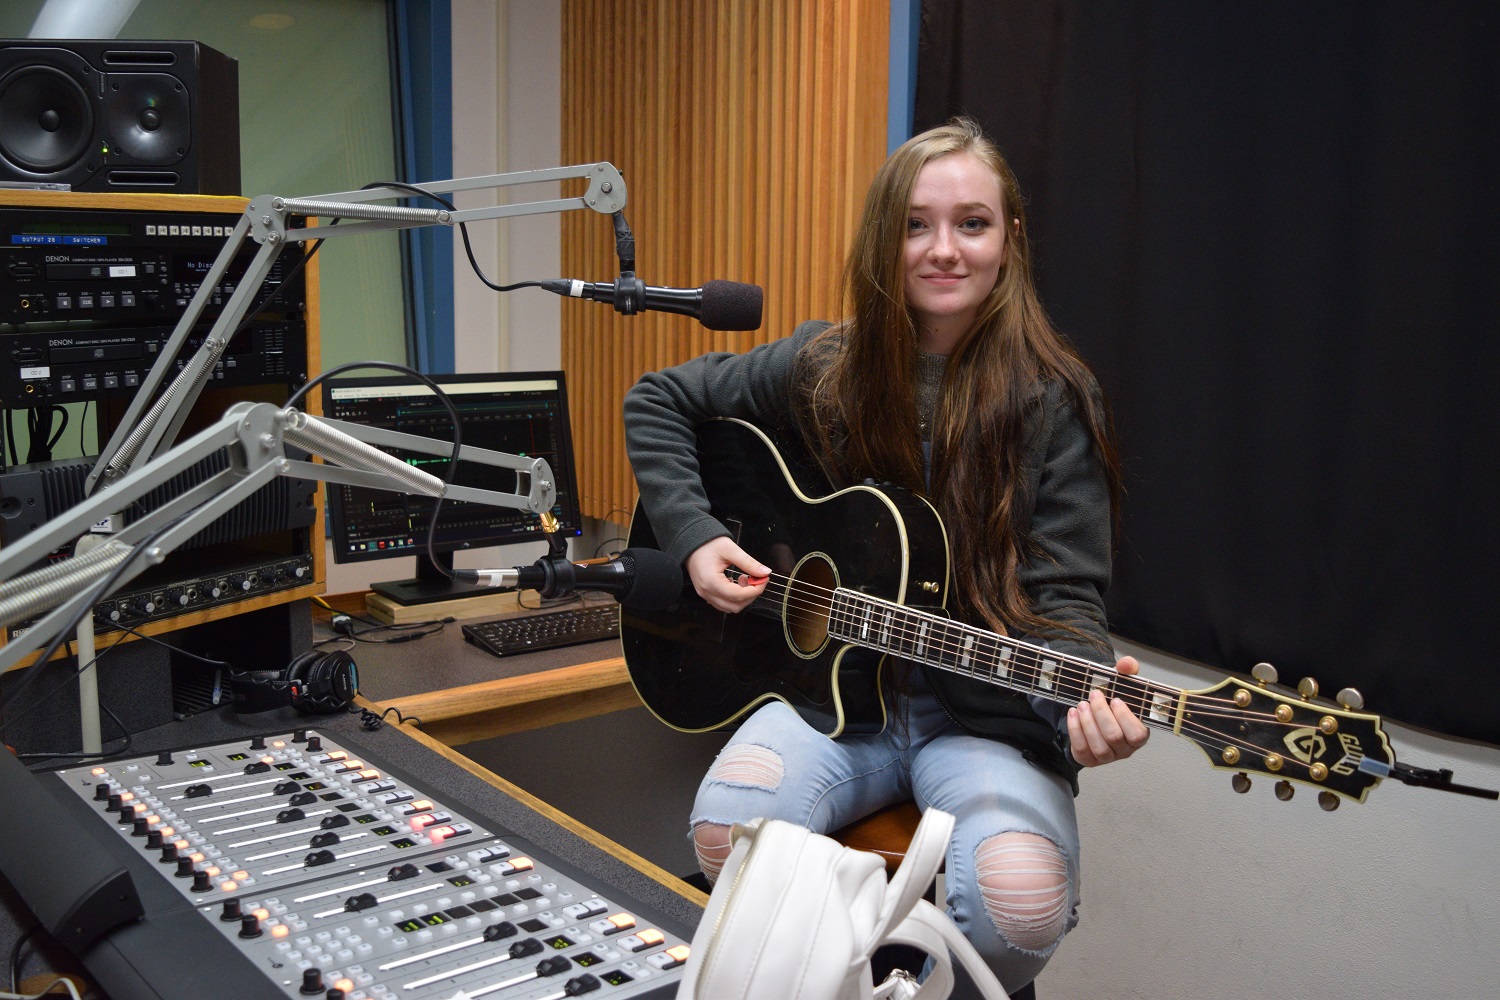 Coyote Johnson plays guitar and recorded her song "Stuck On You" in WPR's studios. (Maureen MCCollum/WPR)